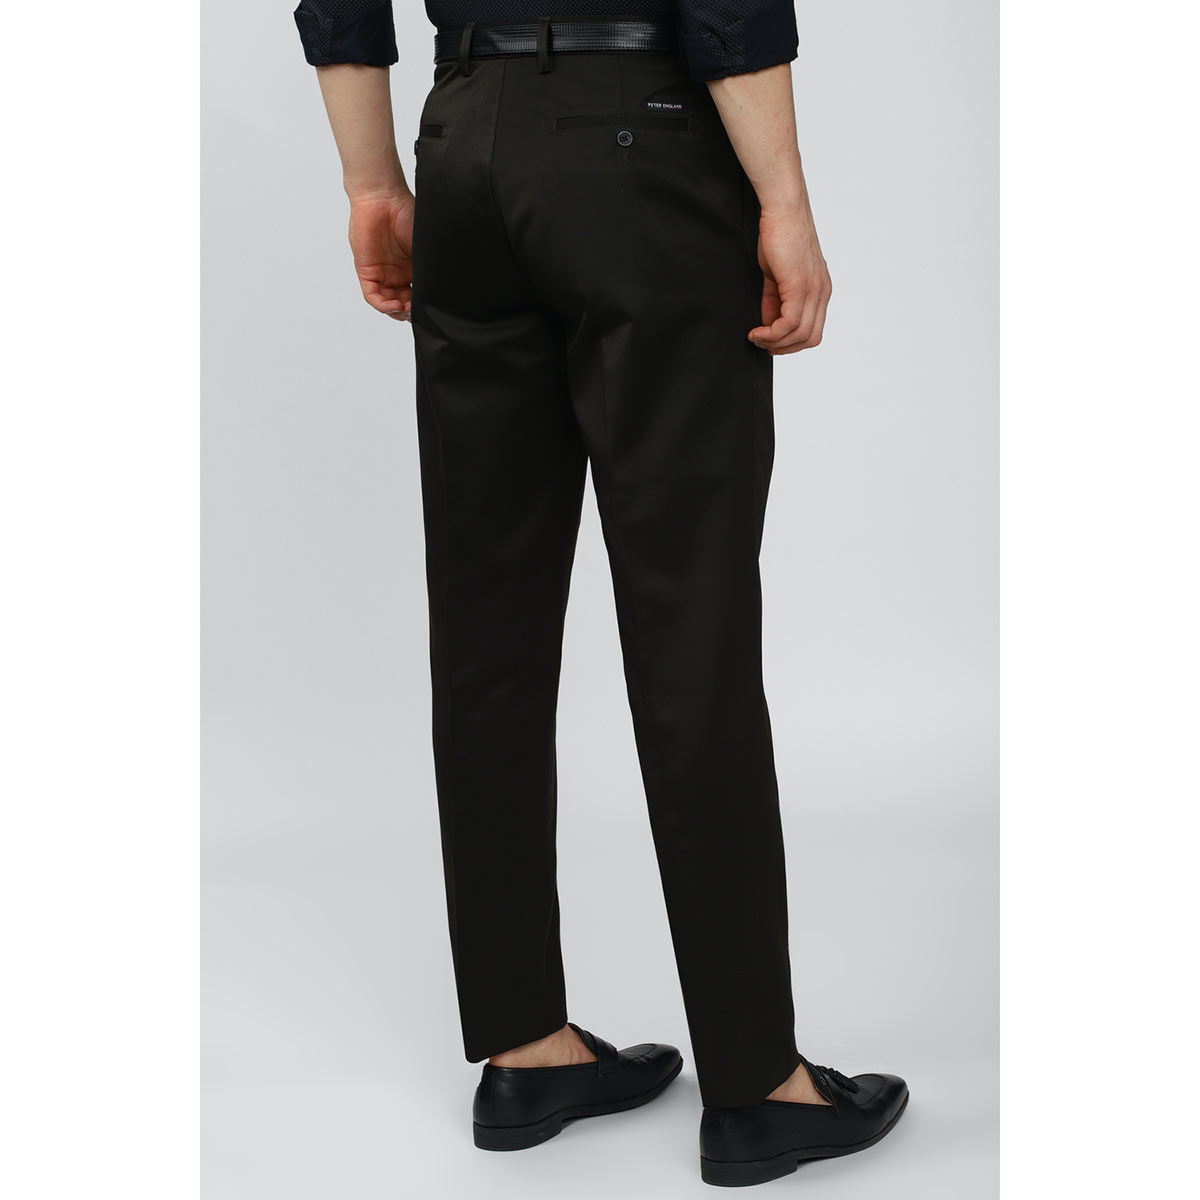 Navy 100% Cotton Peter England Trousers Ptf31700986 at Rs 840 in Moga